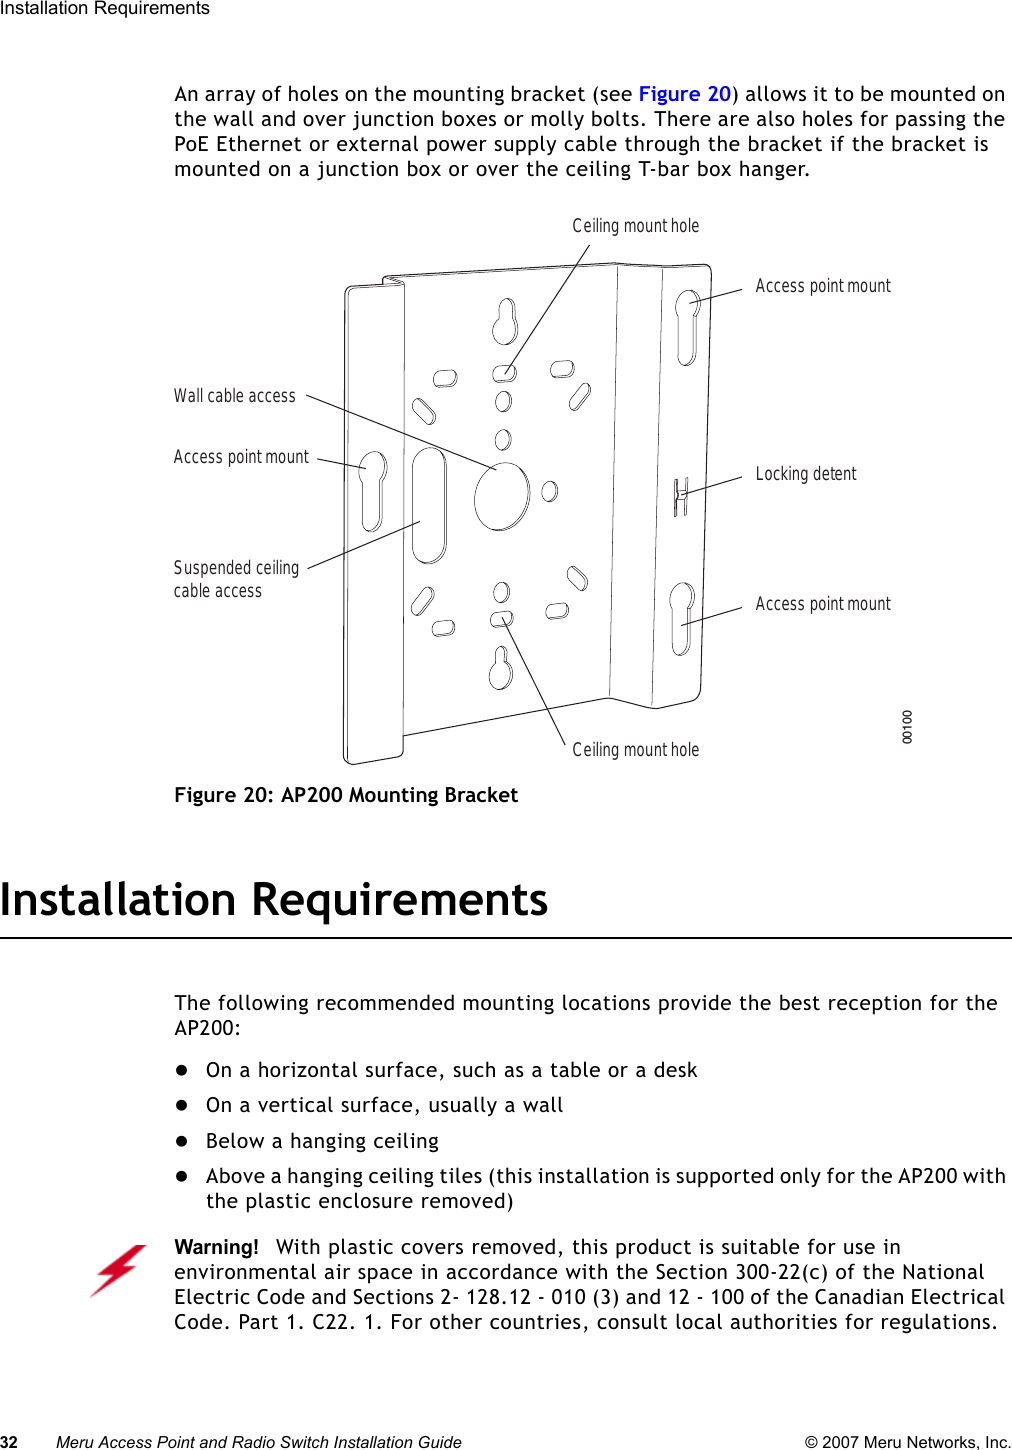 32 Meru Access Point and Radio Switch Installation Guide © 2007 Meru Networks, Inc.Installation Requirements An array of holes on the mounting bracket (see Figure 20) allows it to be mounted on the wall and over junction boxes or molly bolts. There are also holes for passing the PoE Ethernet or external power supply cable through the bracket if the bracket is mounted on a junction box or over the ceiling T-bar box hanger. Figure 20: AP200 Mounting BracketInstallation RequirementsThe following recommended mounting locations provide the best reception for the AP200:zOn a horizontal surface, such as a table or a deskzOn a vertical surface, usually a wallzBelow a hanging ceilingzAbove a hanging ceiling tiles (this installation is supported only for the AP200 with the plastic enclosure removed)Access point mountCeiling mount holeCeiling mount holeAccess point mountAccess point mountLocking detentWall cable accessSuspended ceilingcable access00100Warning!   With plastic covers removed, this product is suitable for use in environmental air space in accordance with the Section 300-22(c) of the National Electric Code and Sections 2- 128.12 - 010 (3) and 12 - 100 of the Canadian Electrical Code. Part 1. C22. 1. For other countries, consult local authorities for regulations.